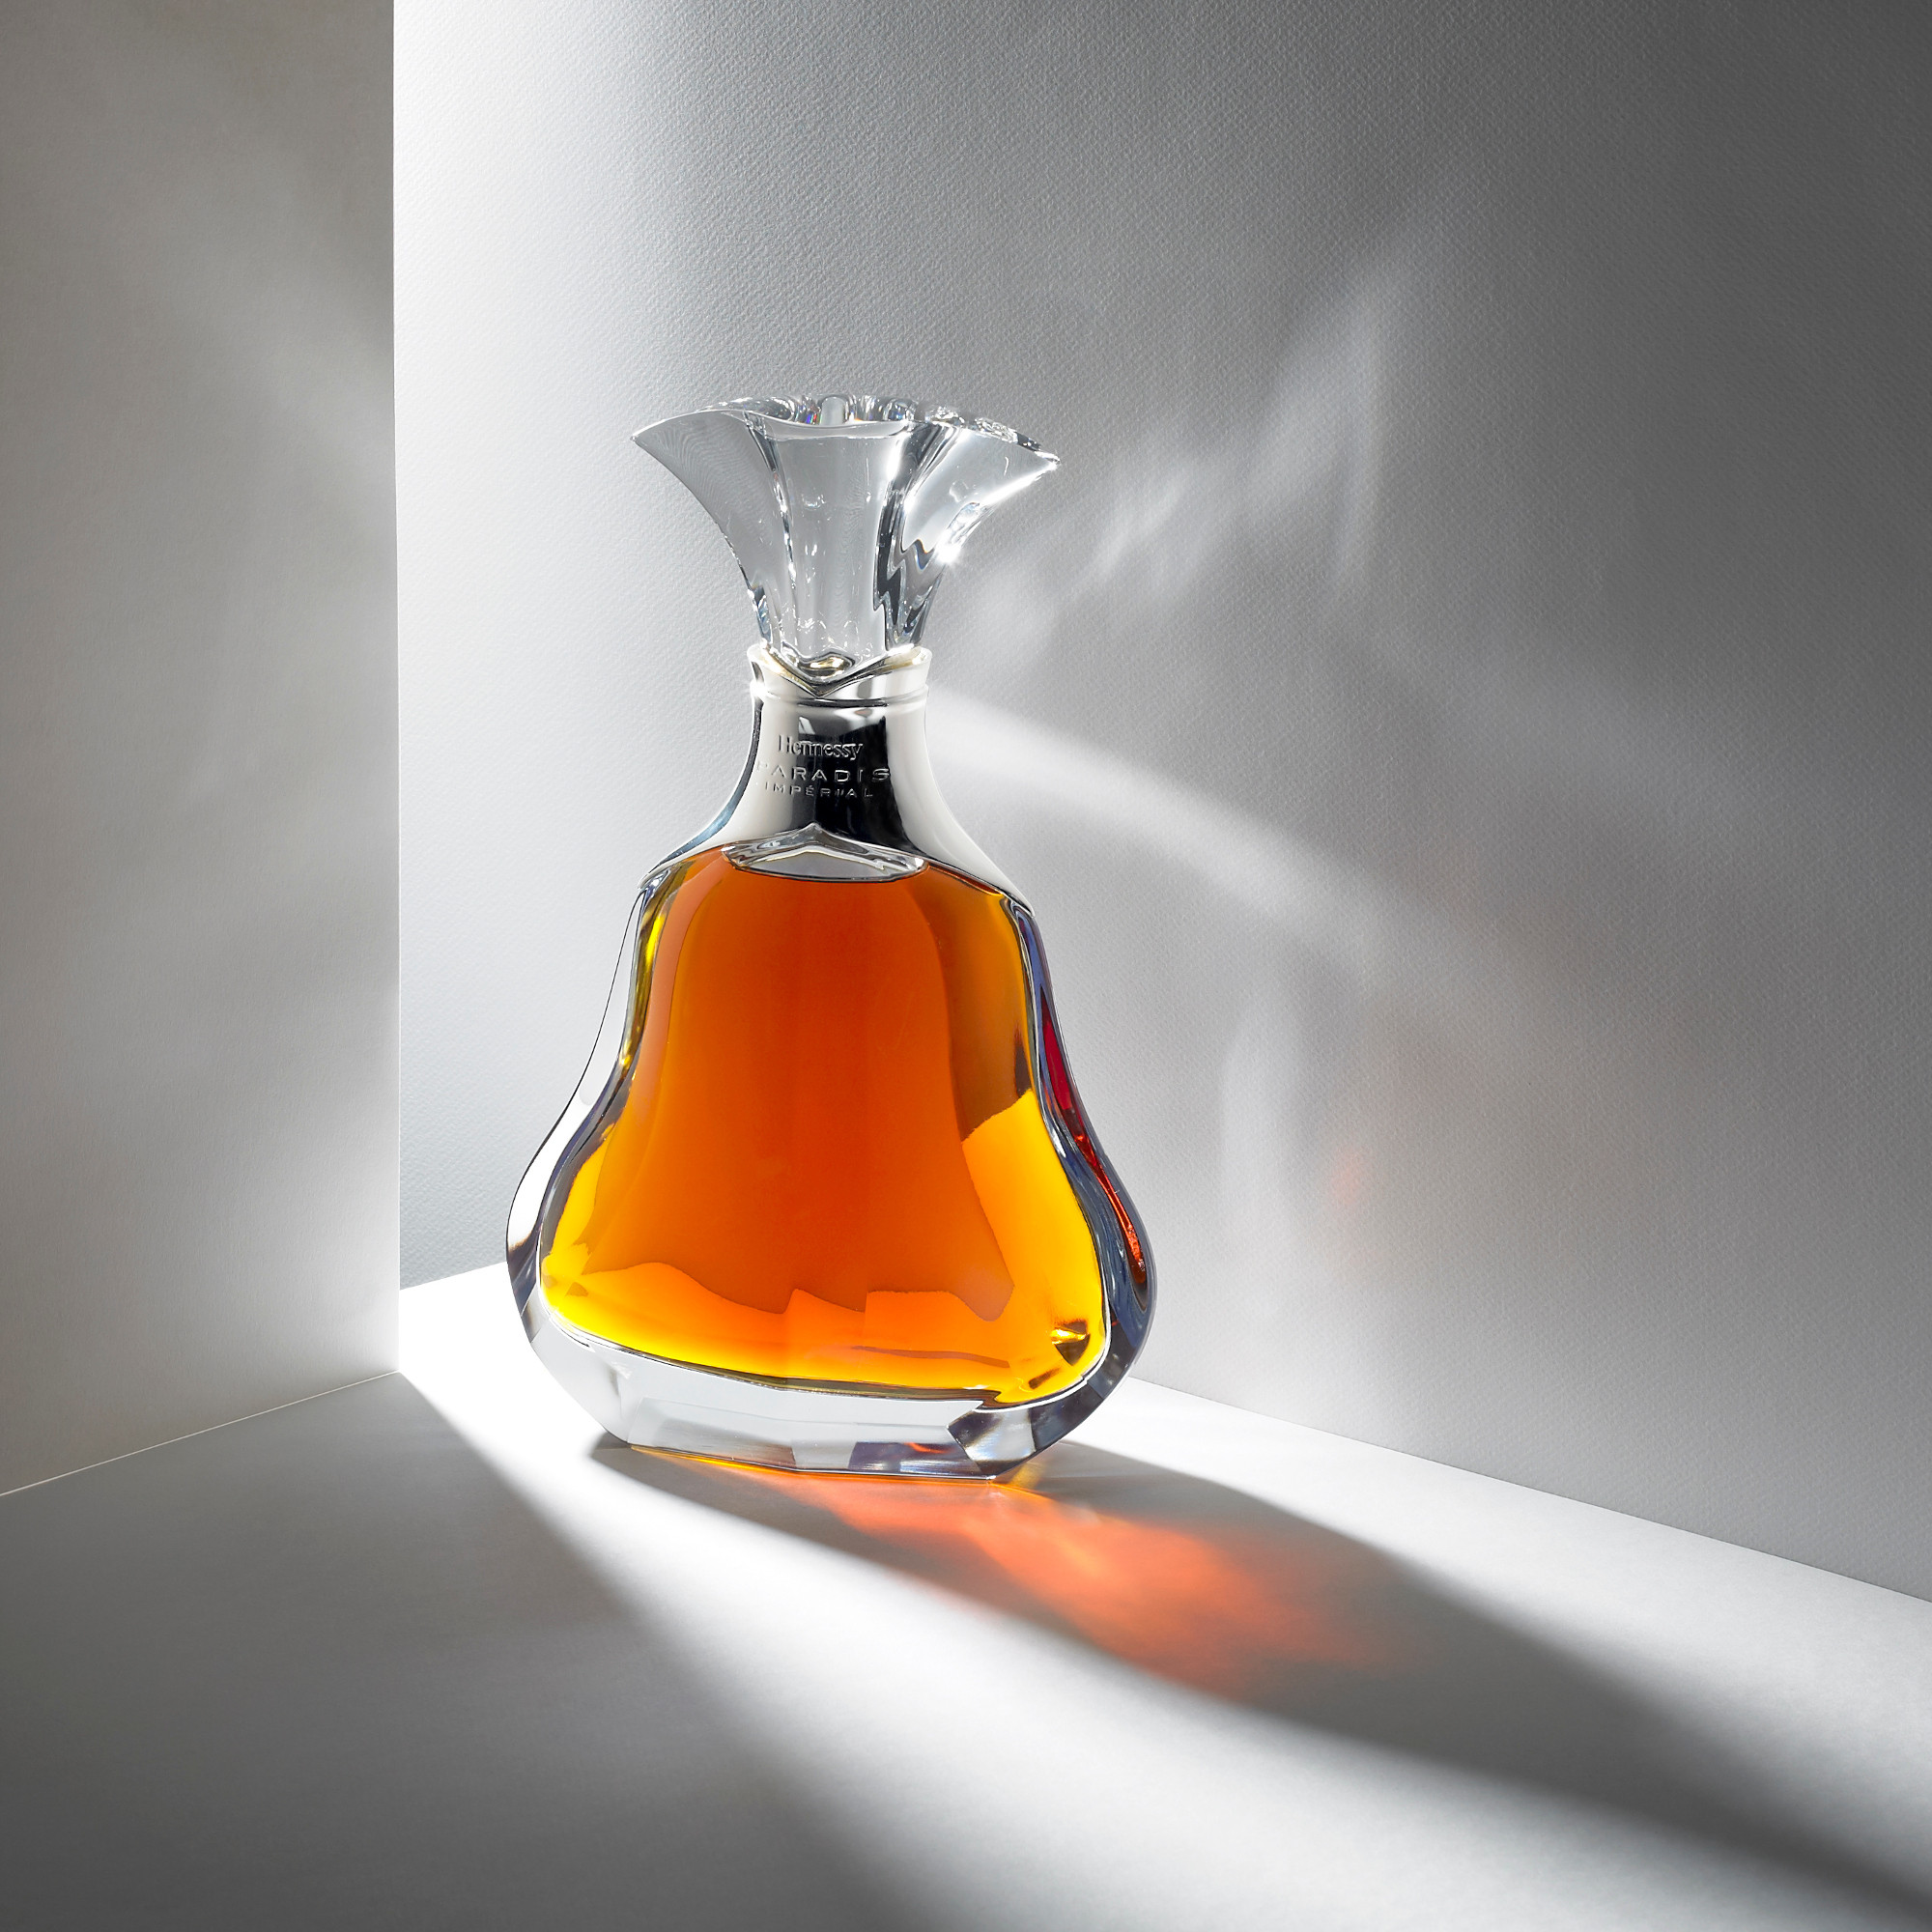 Hennessy Paradis Imperial 2.0 - Precision in Craftsmanship 